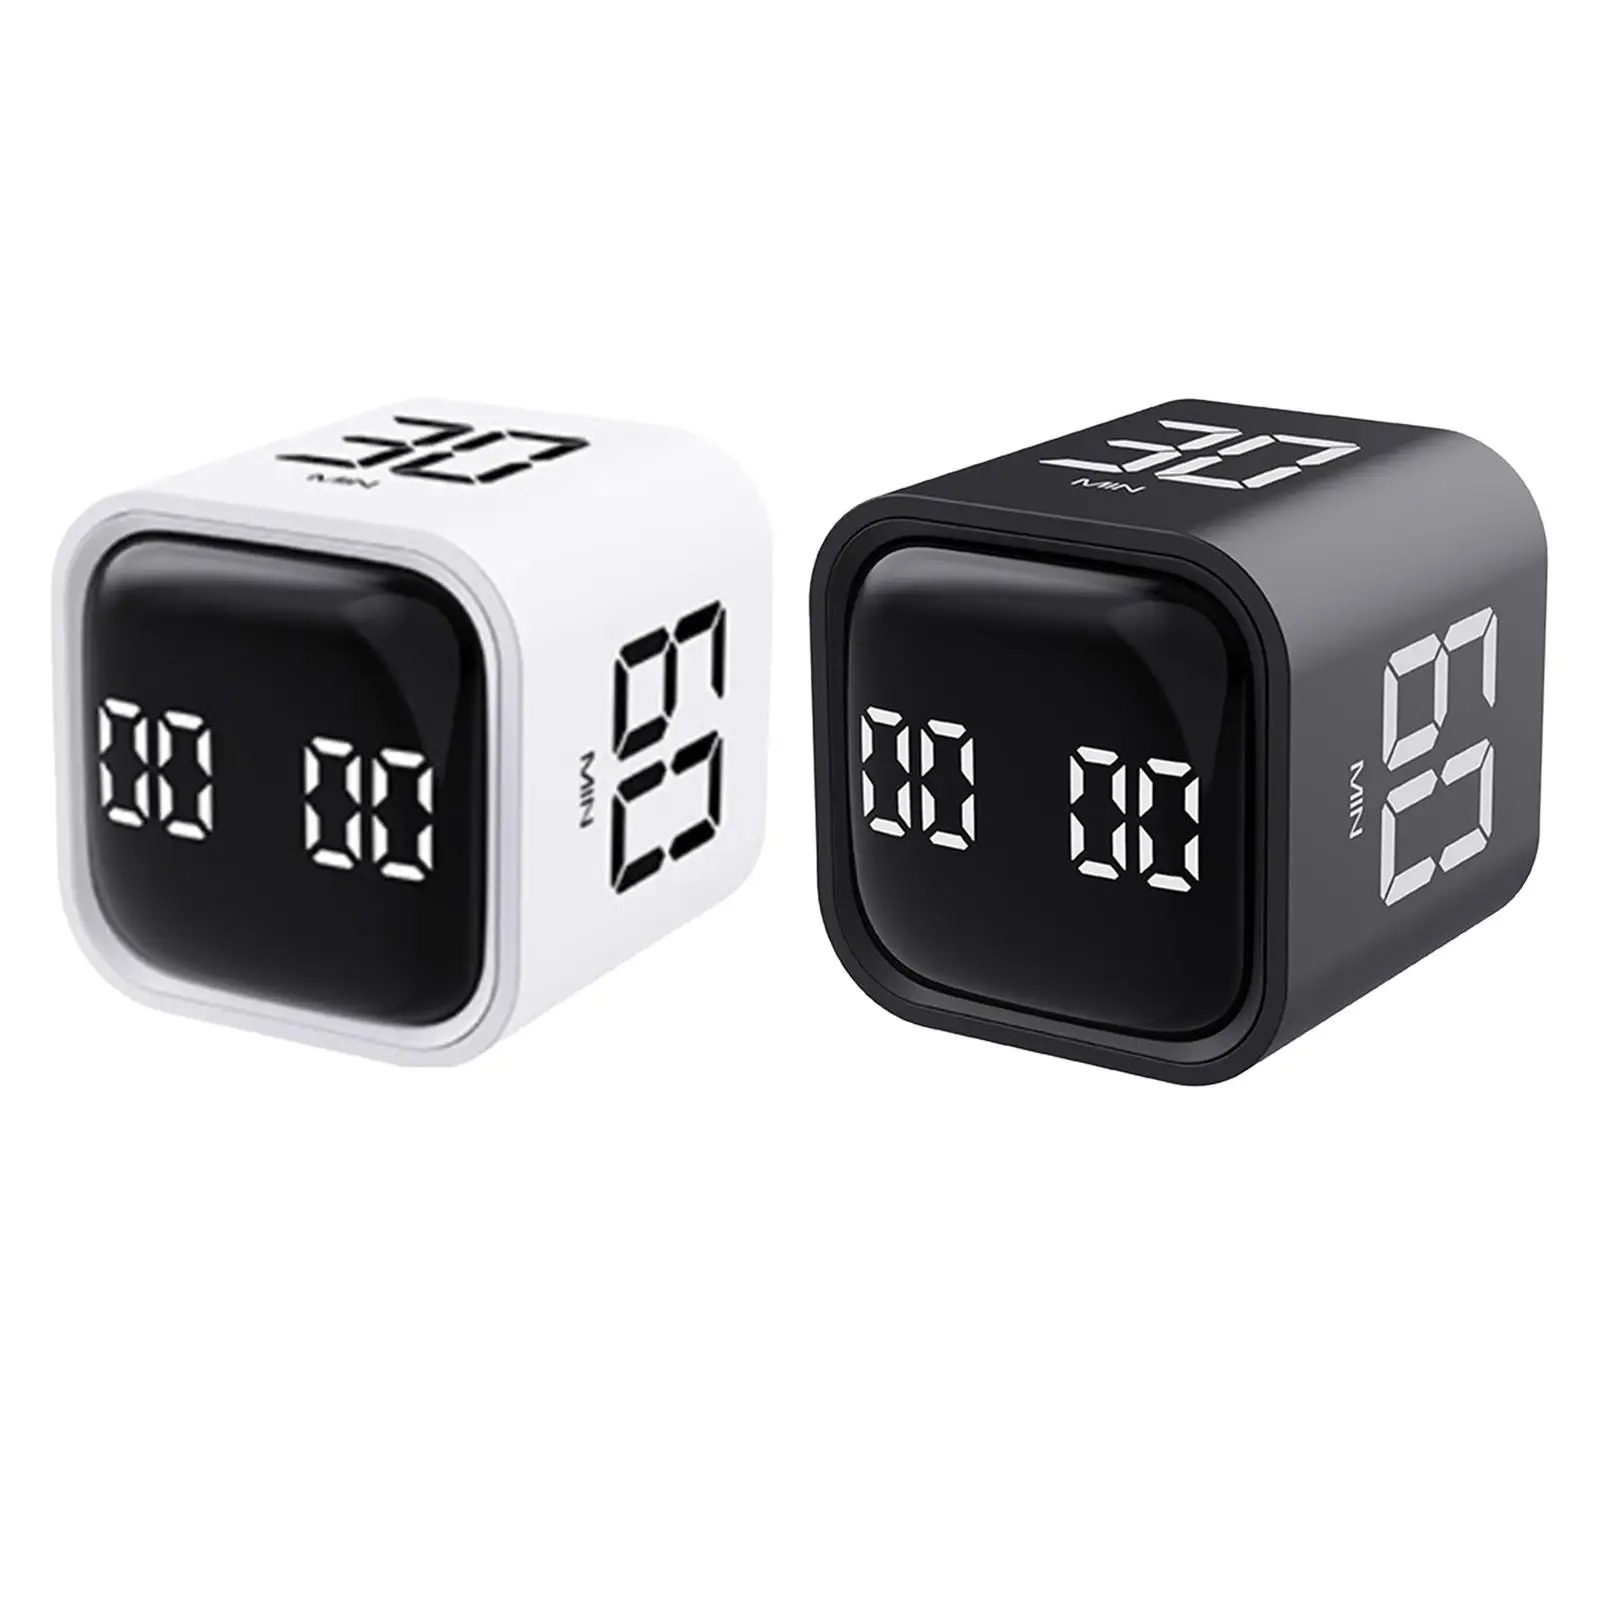 Cube timers Flip Timer Time Management Gravity Sensor Workout Timer Kitchen Timer for Exercise Cooking Office Studying Workout